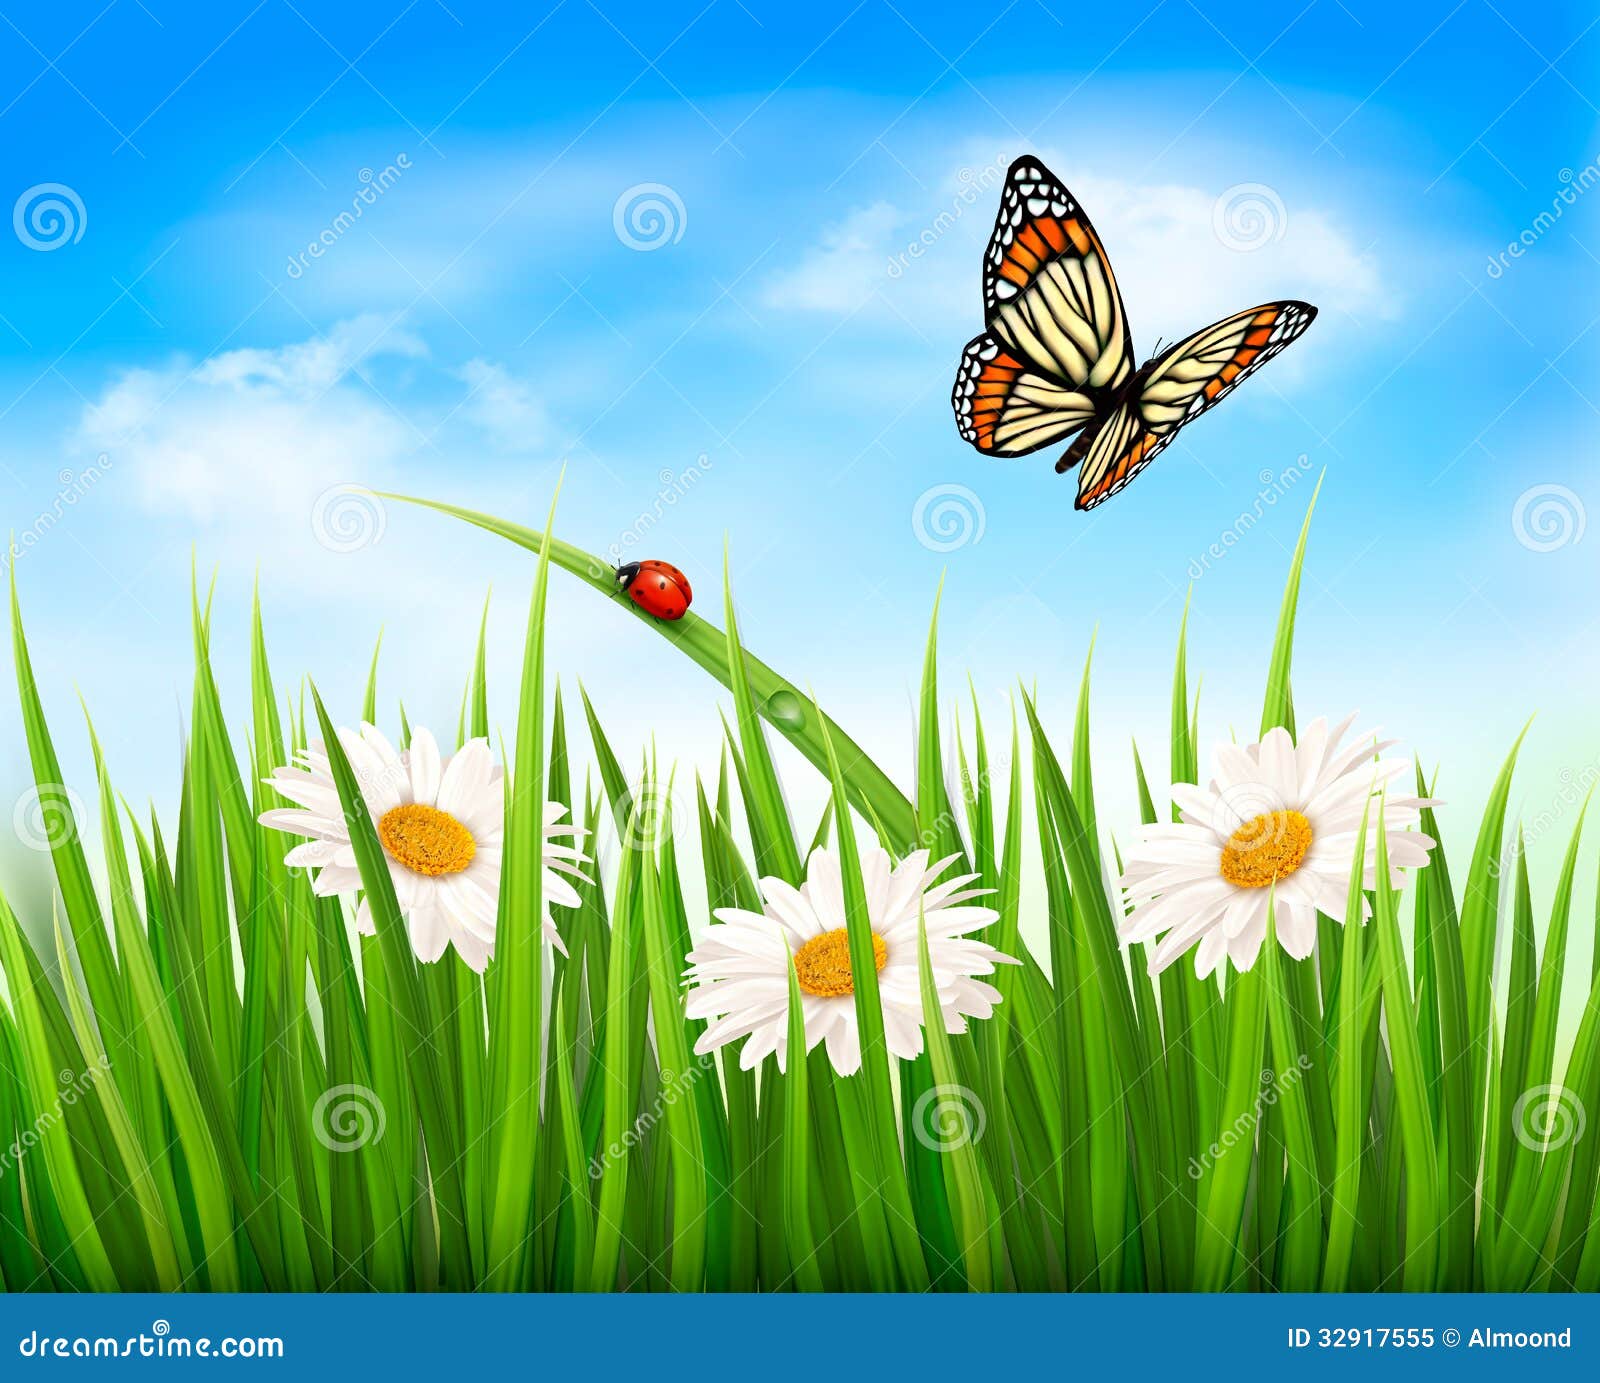 Nature Background With Green Grass Flowers And A Stock Image